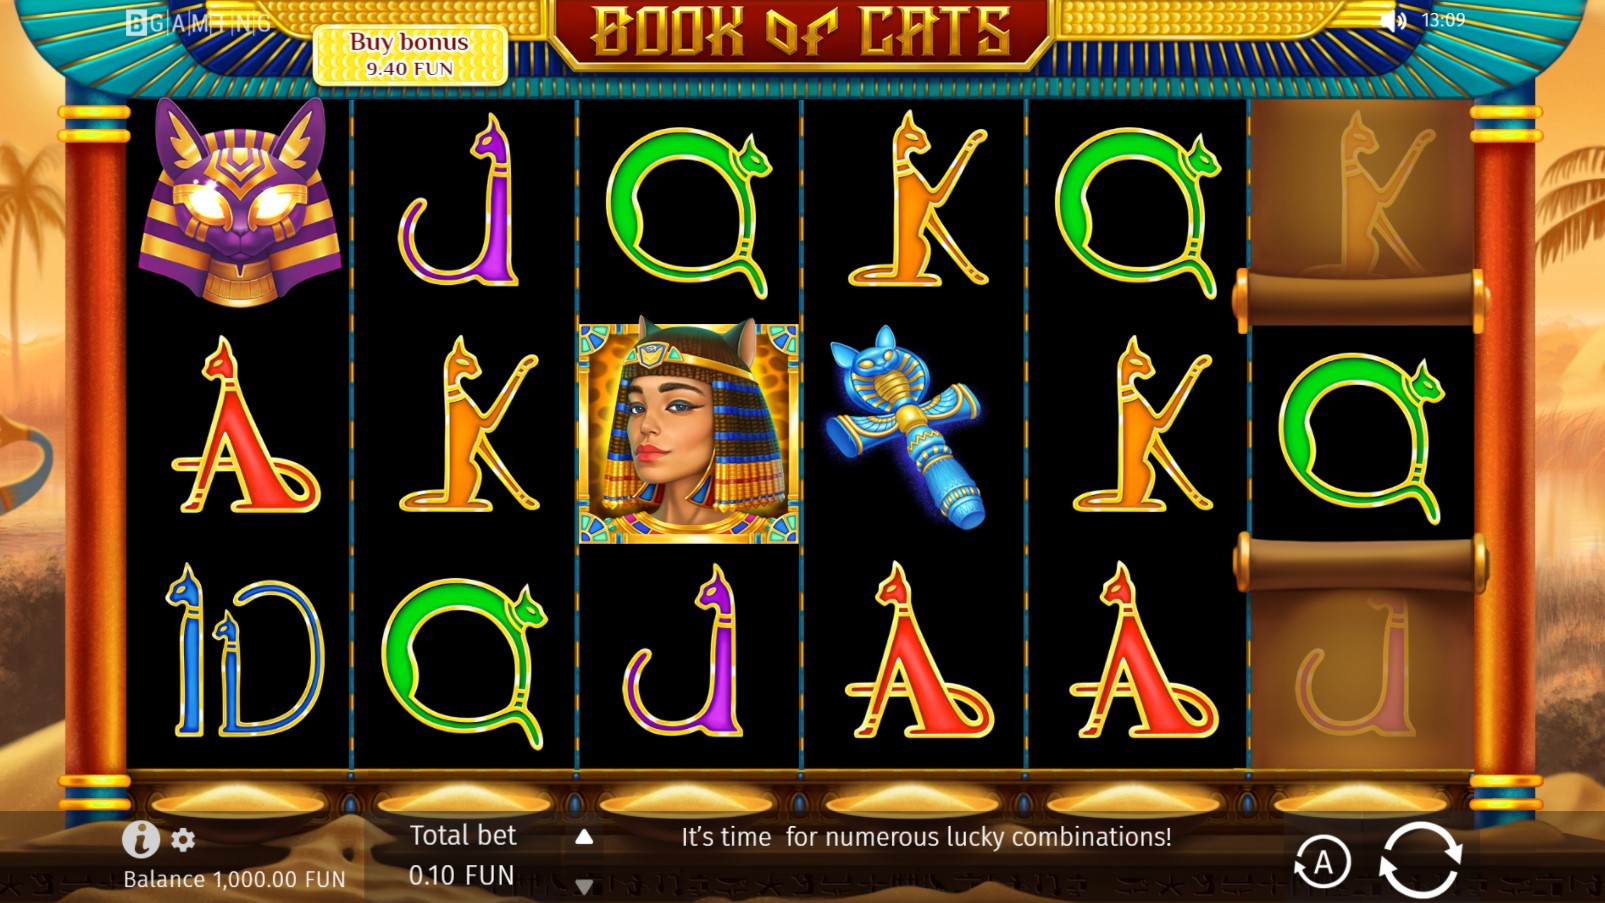 Book of Cats BGaming